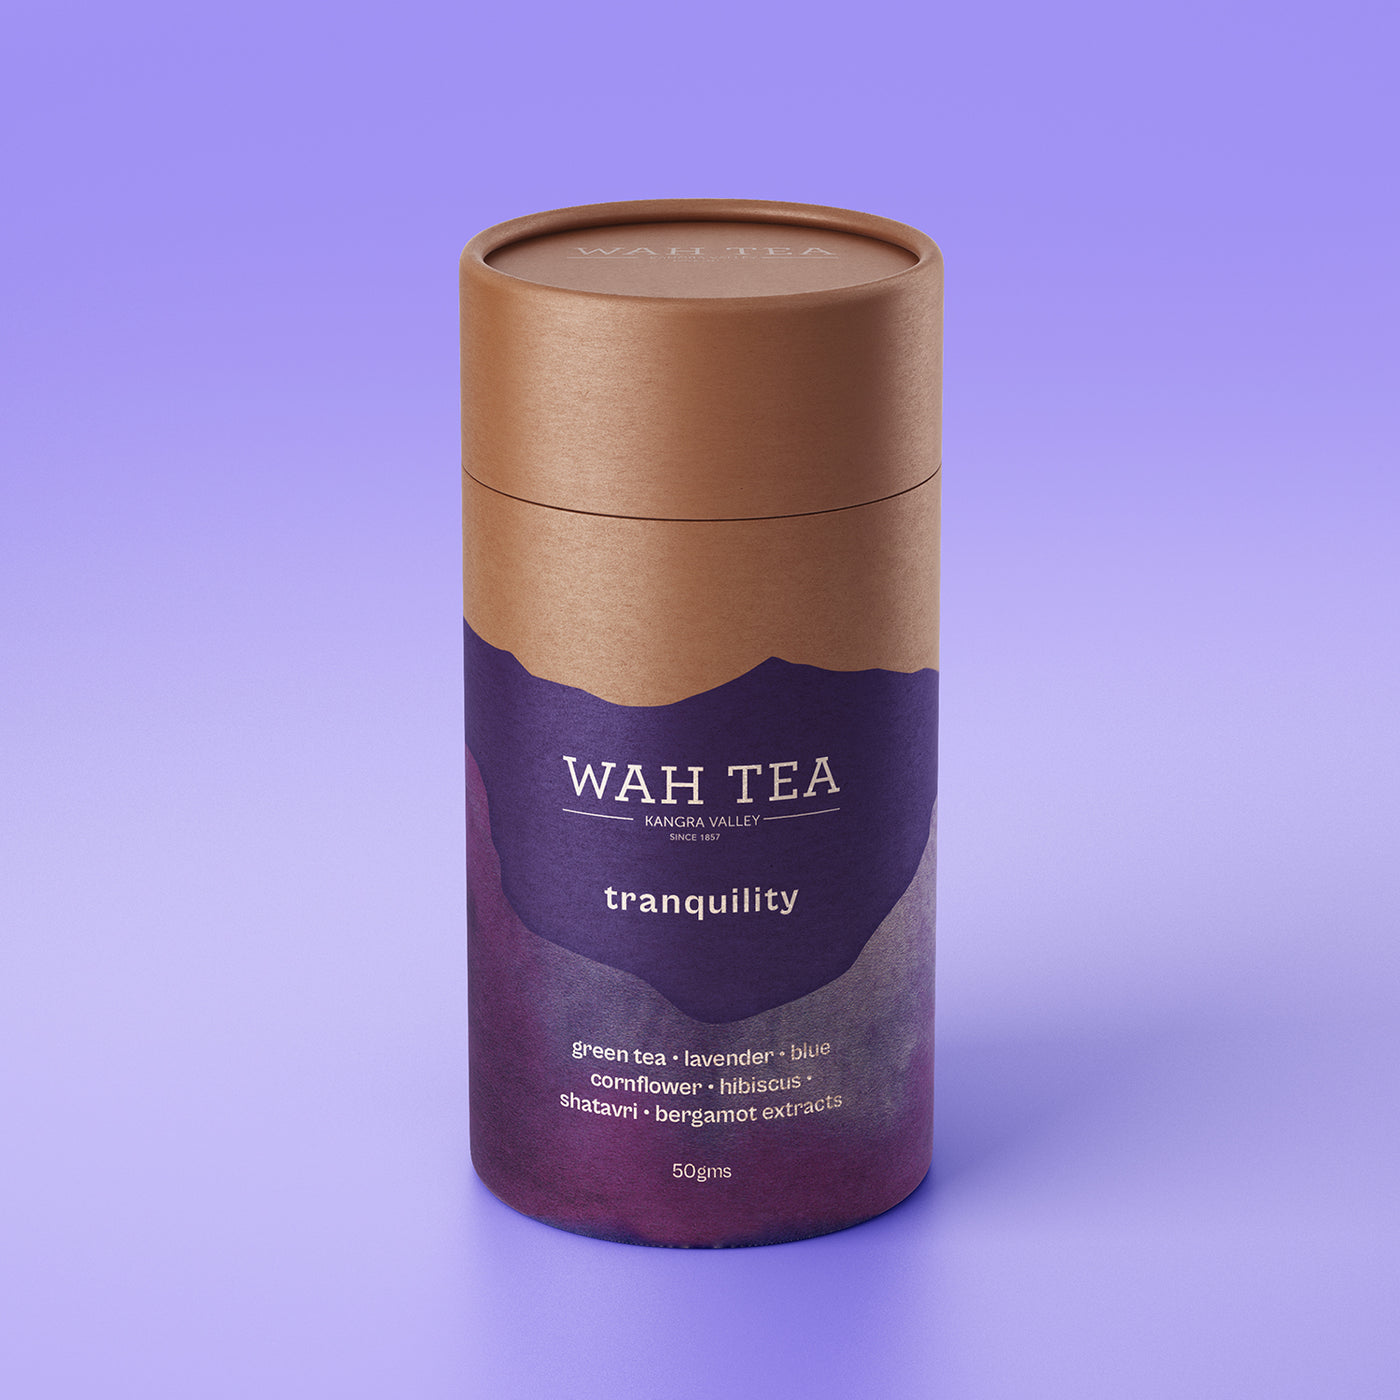 Tranquility Tea - Loose Leaf - Tube Pack of 2 (50g each)